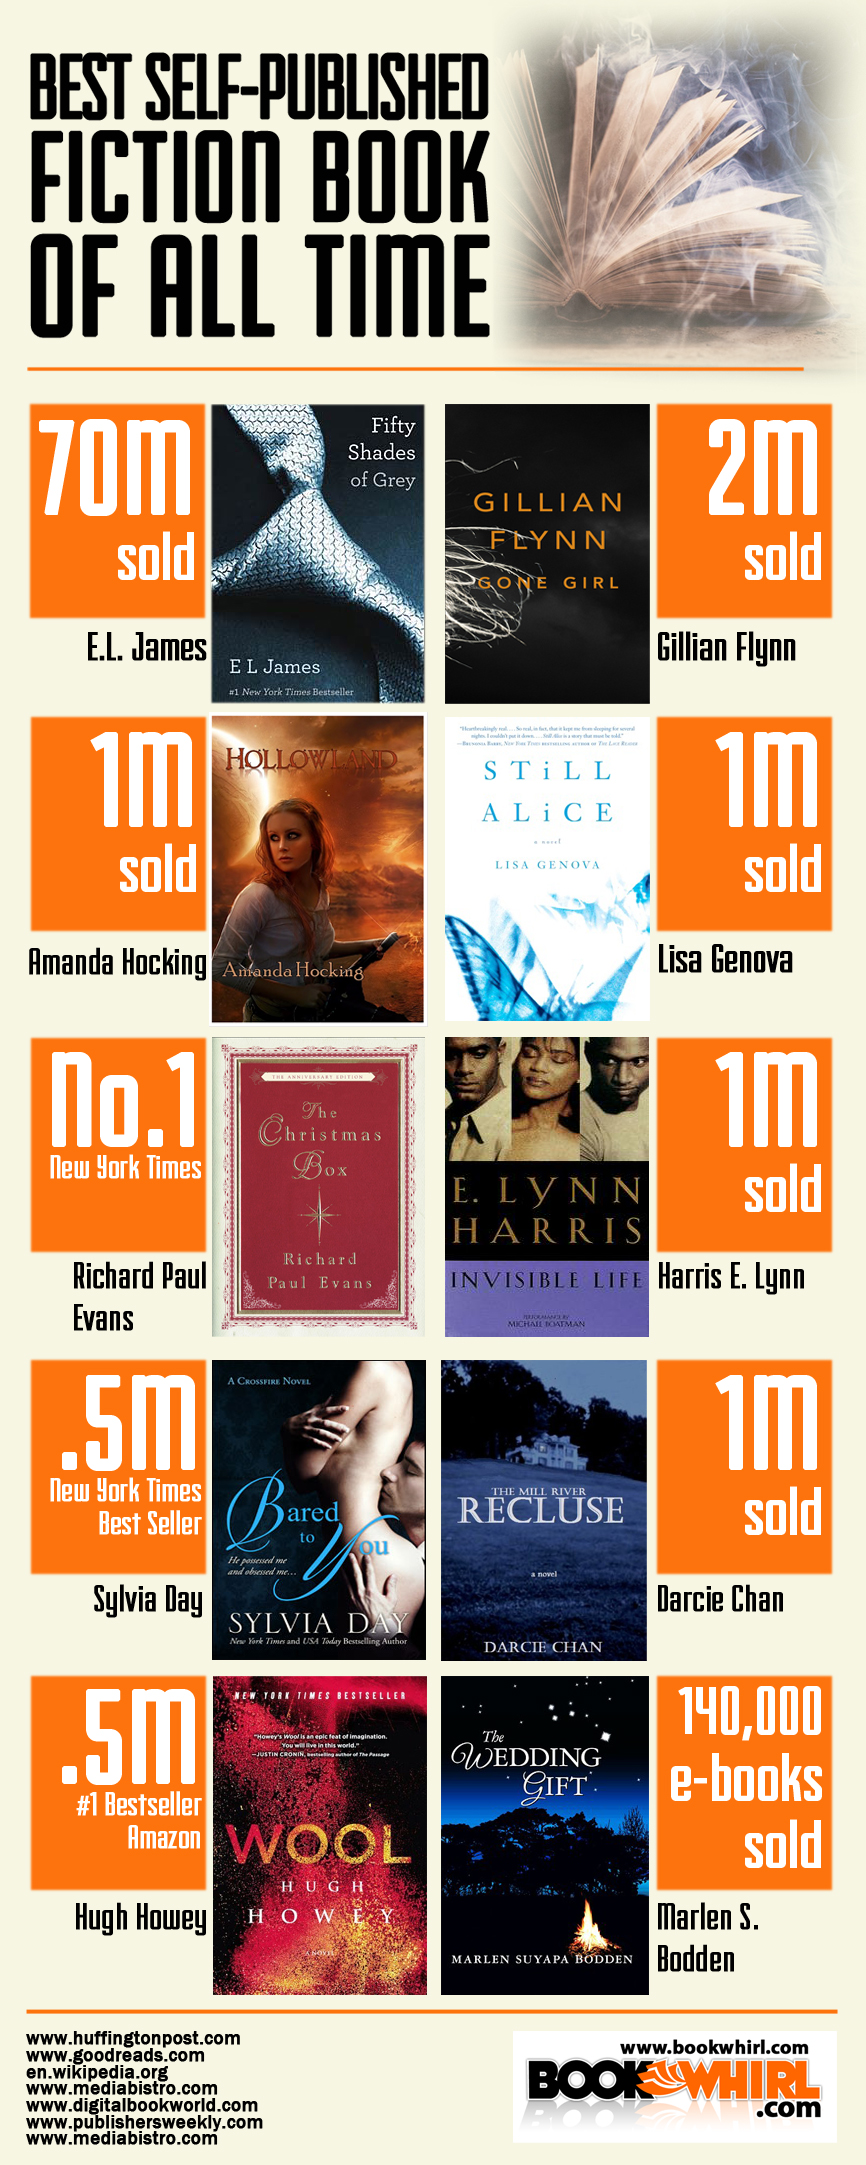 Best SelfPublished Fiction Books of All Time Visual.ly